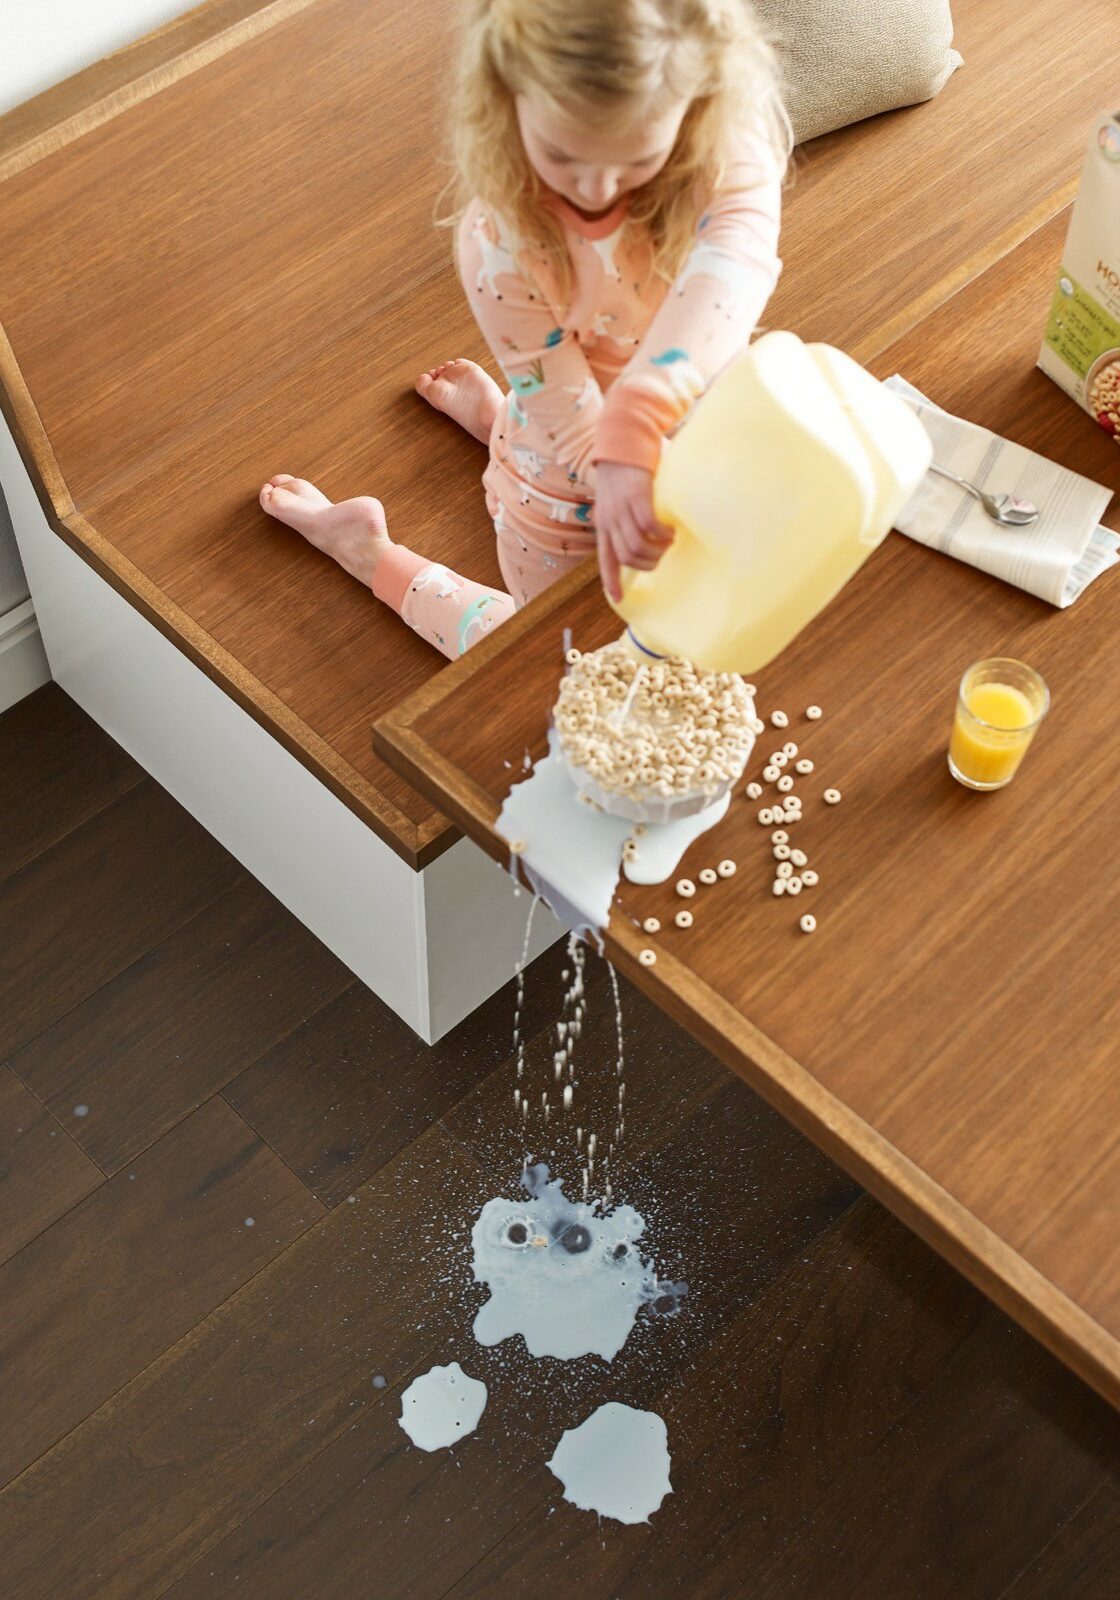 Milk spill cleaning | Floors & Kitchens Today